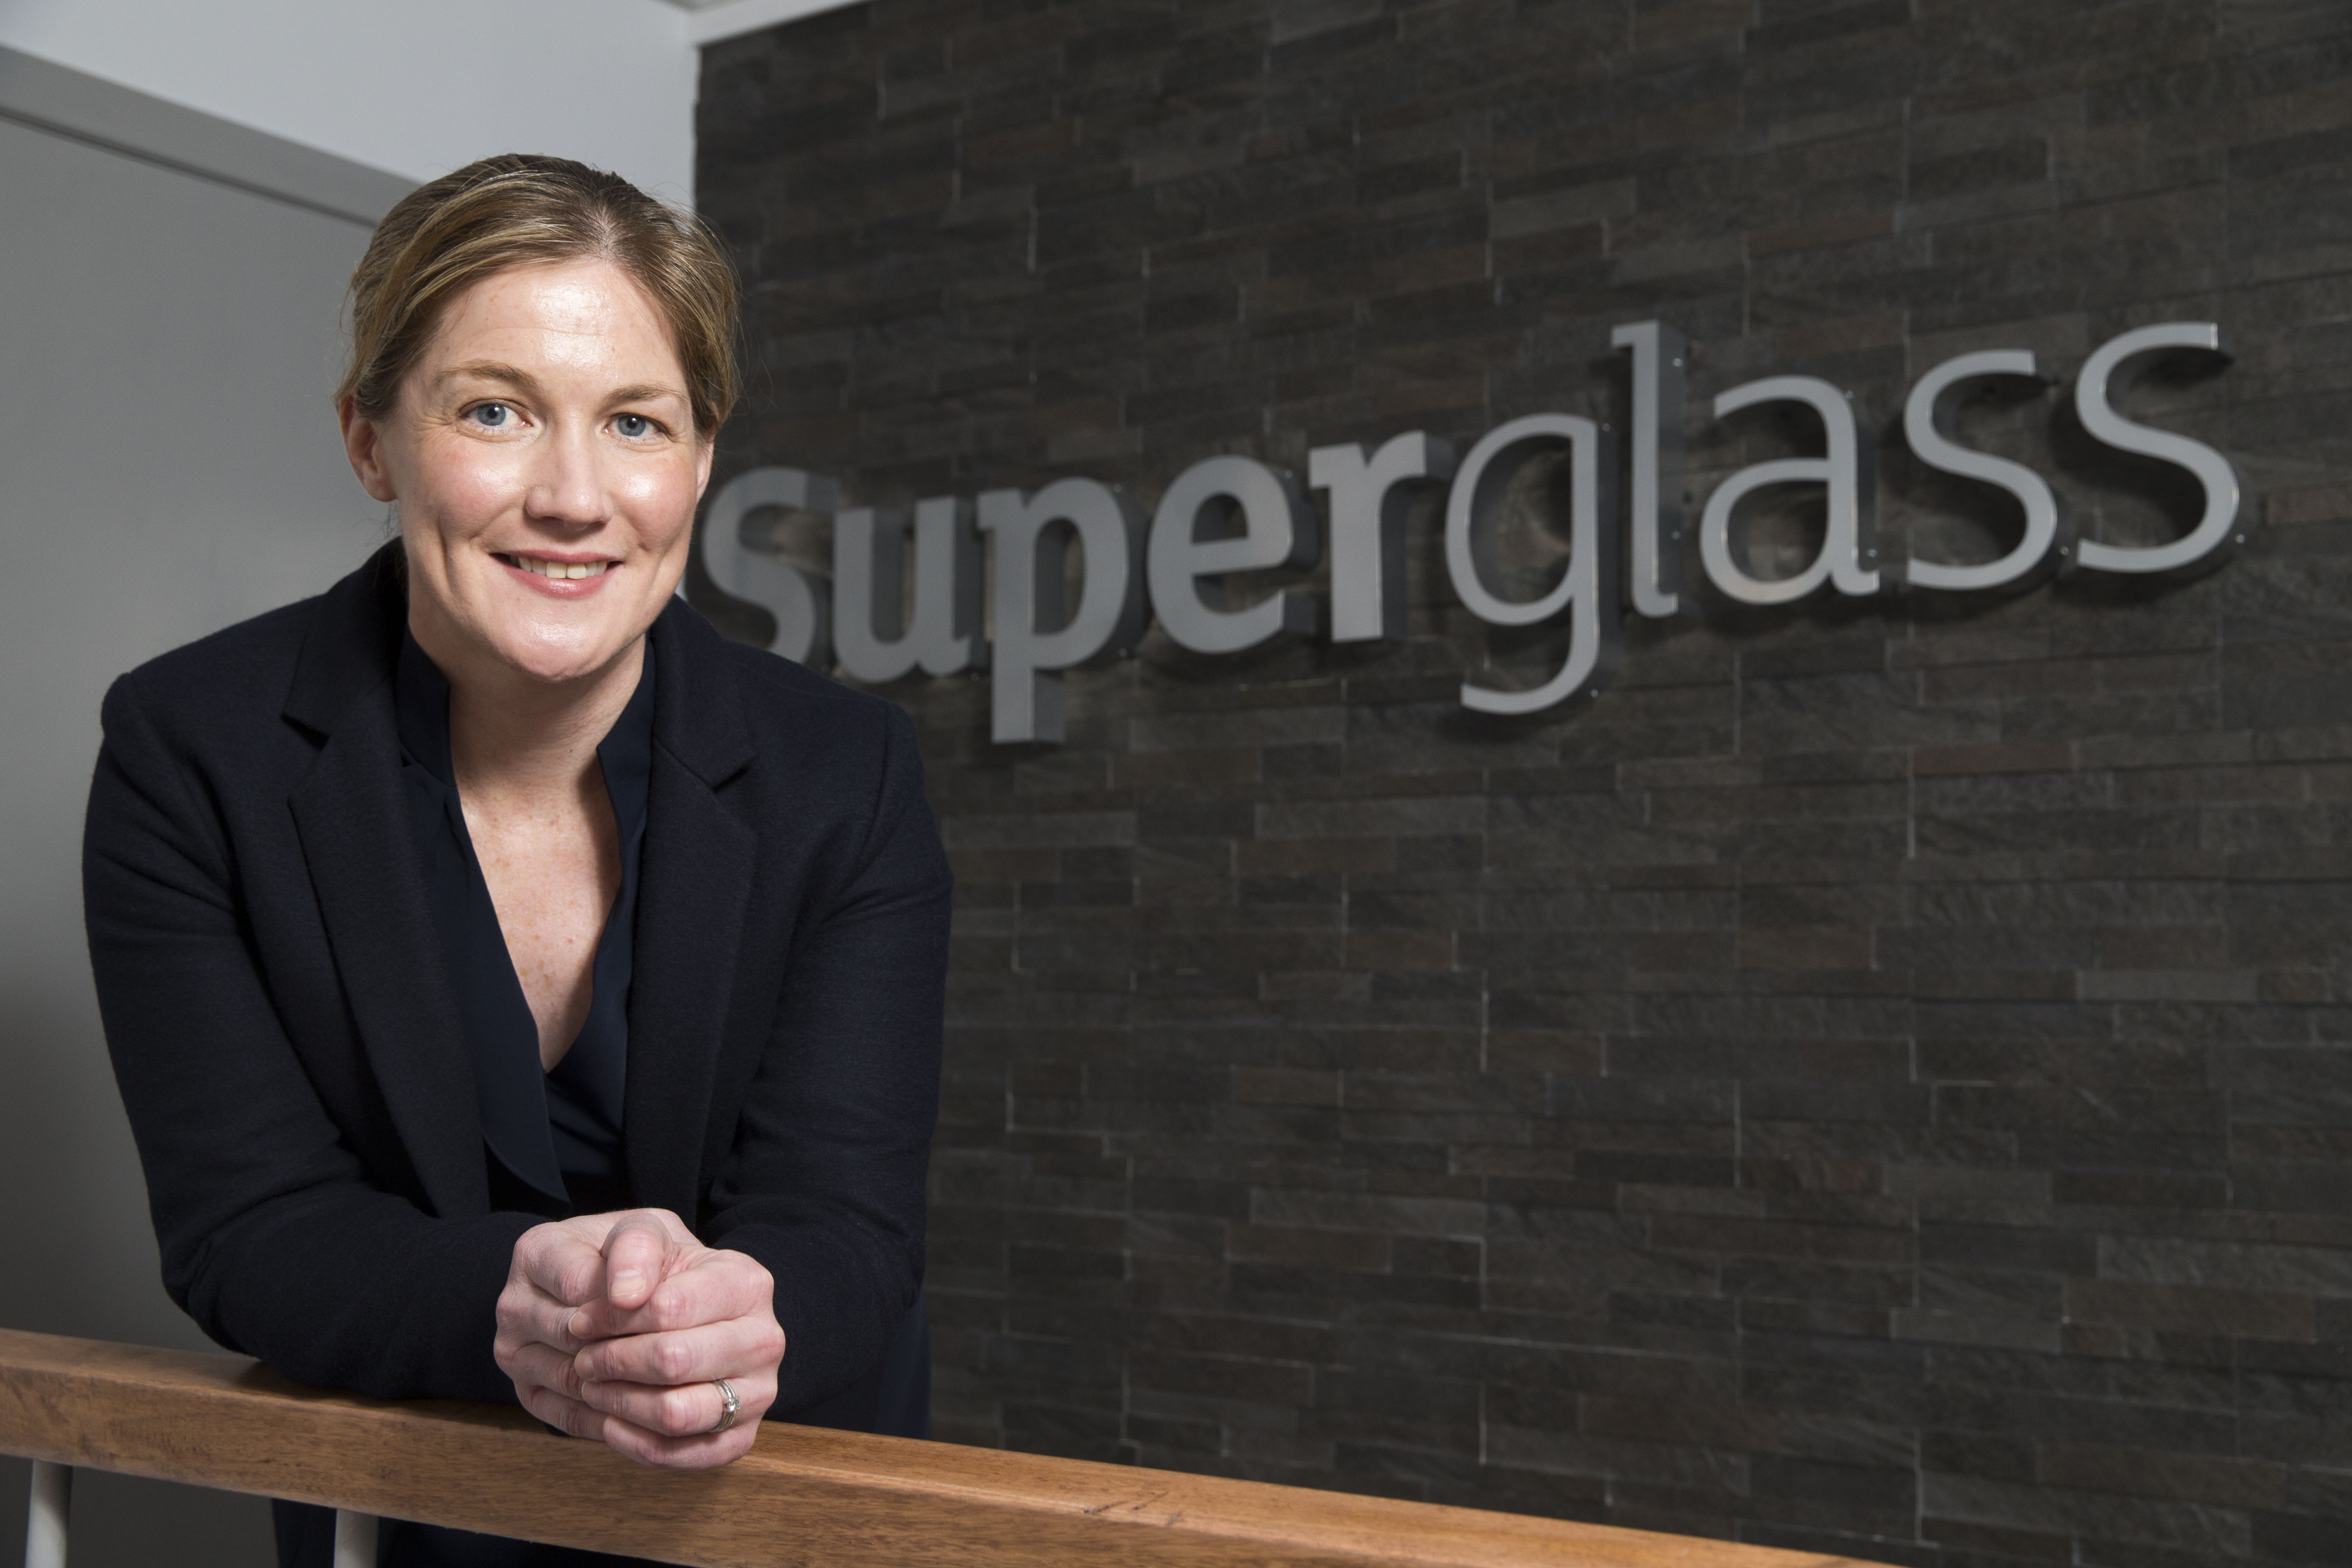 Stirling-based Superglass urges PM to honour £9bn home insulation pledge